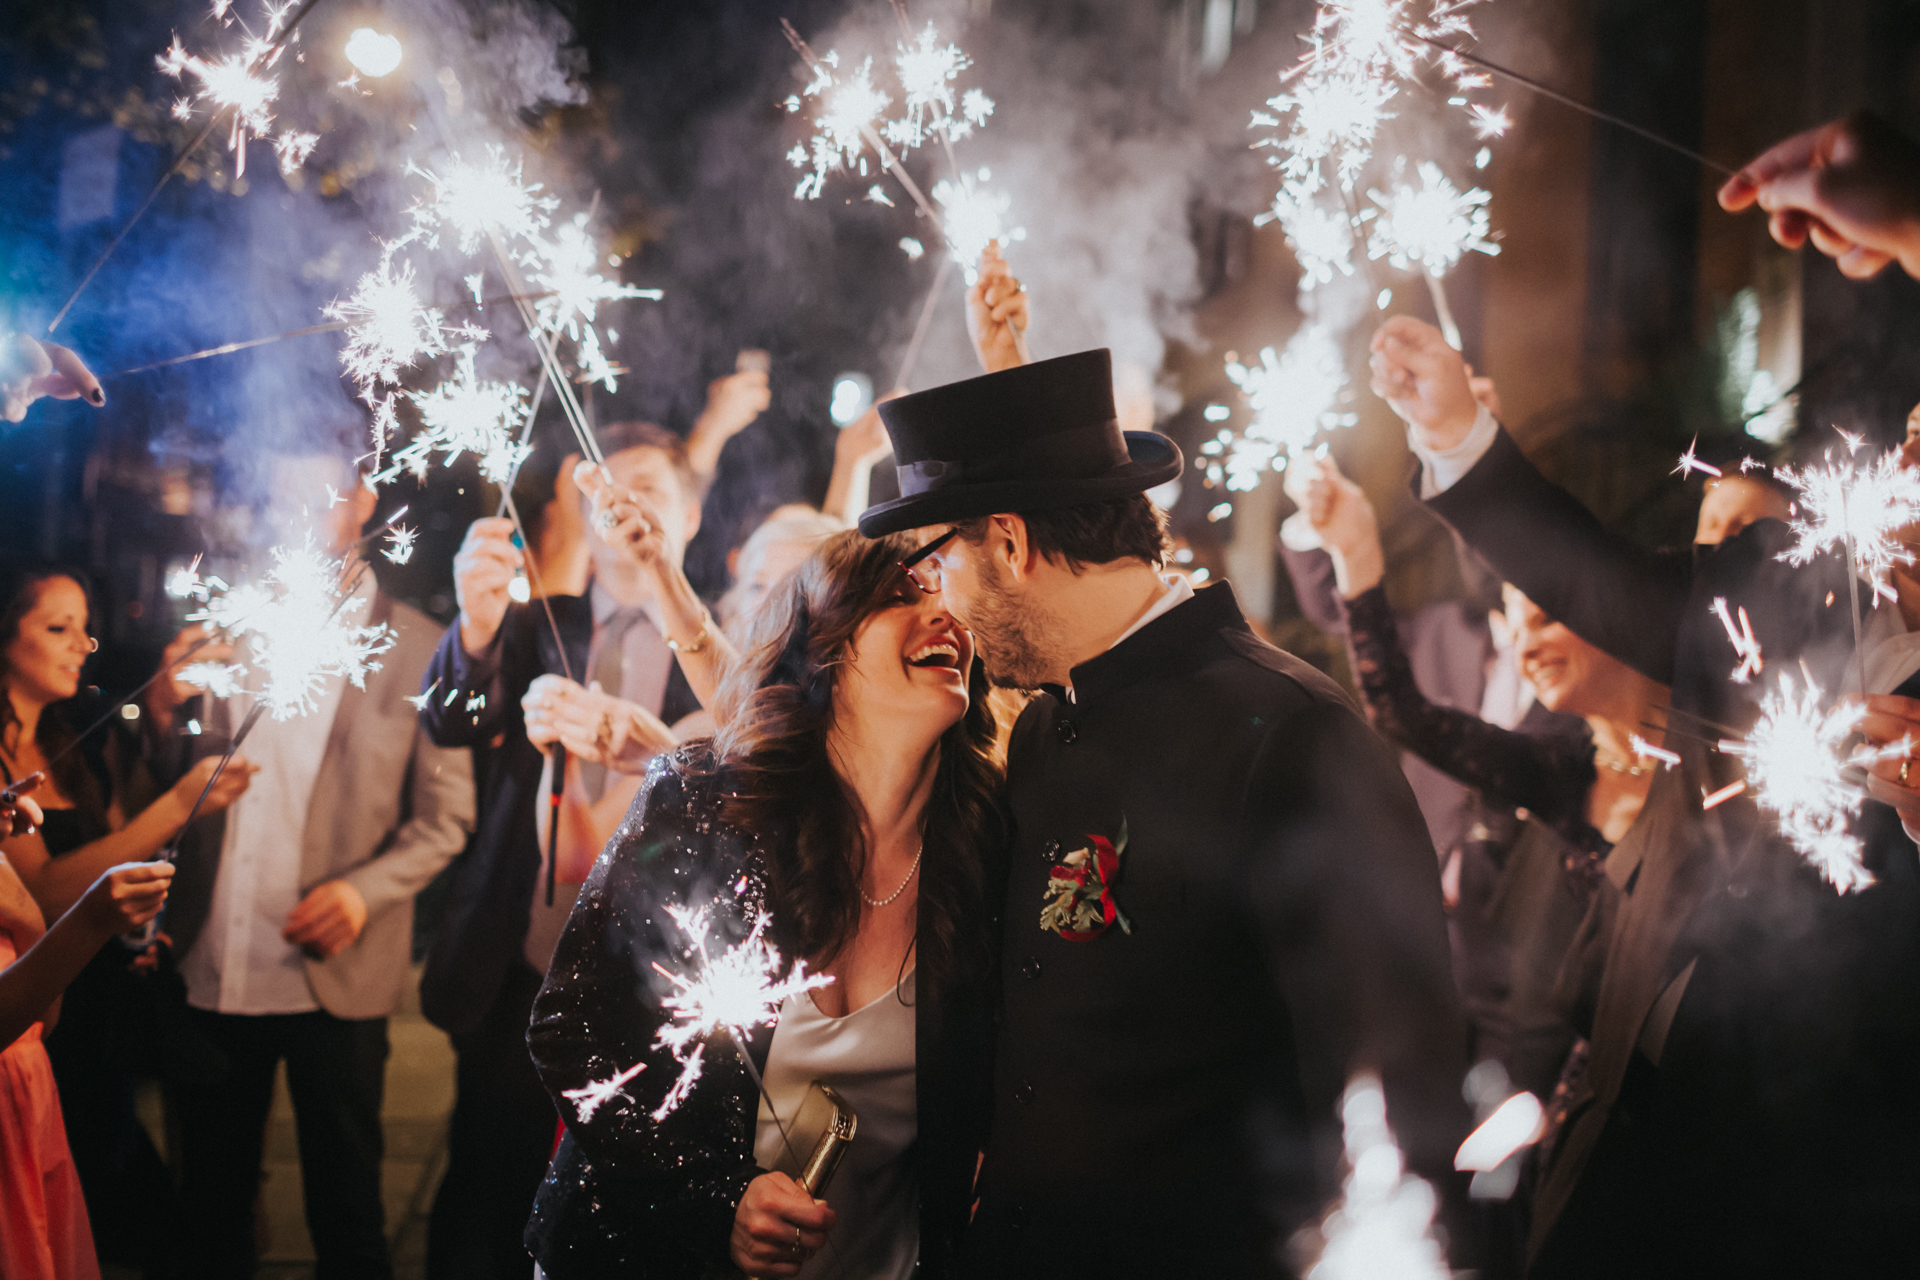  The bride and groom enjoying their send off with sparklers 